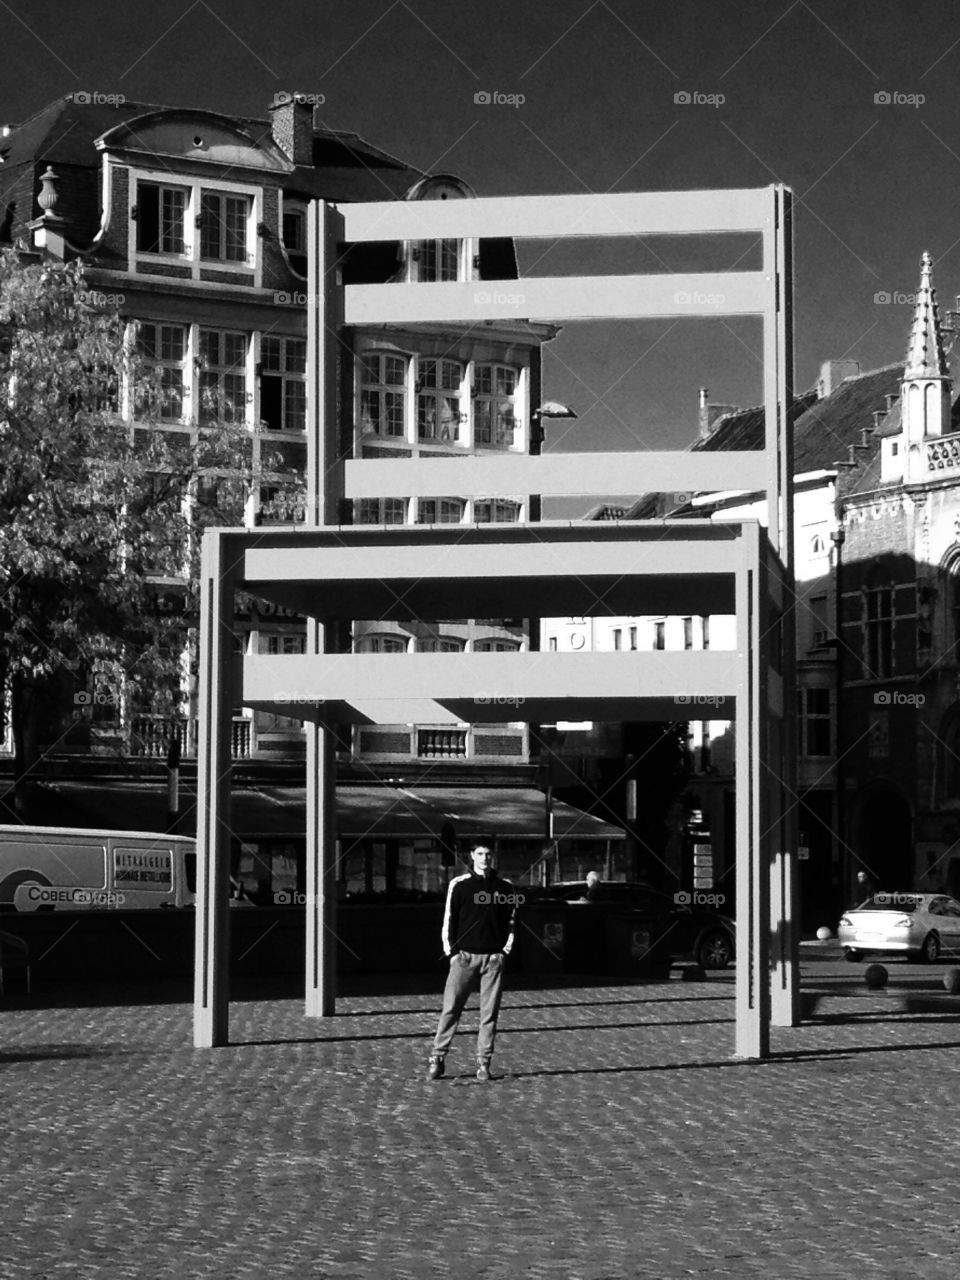 Black and white architecture. Art installation of a big chair on the square